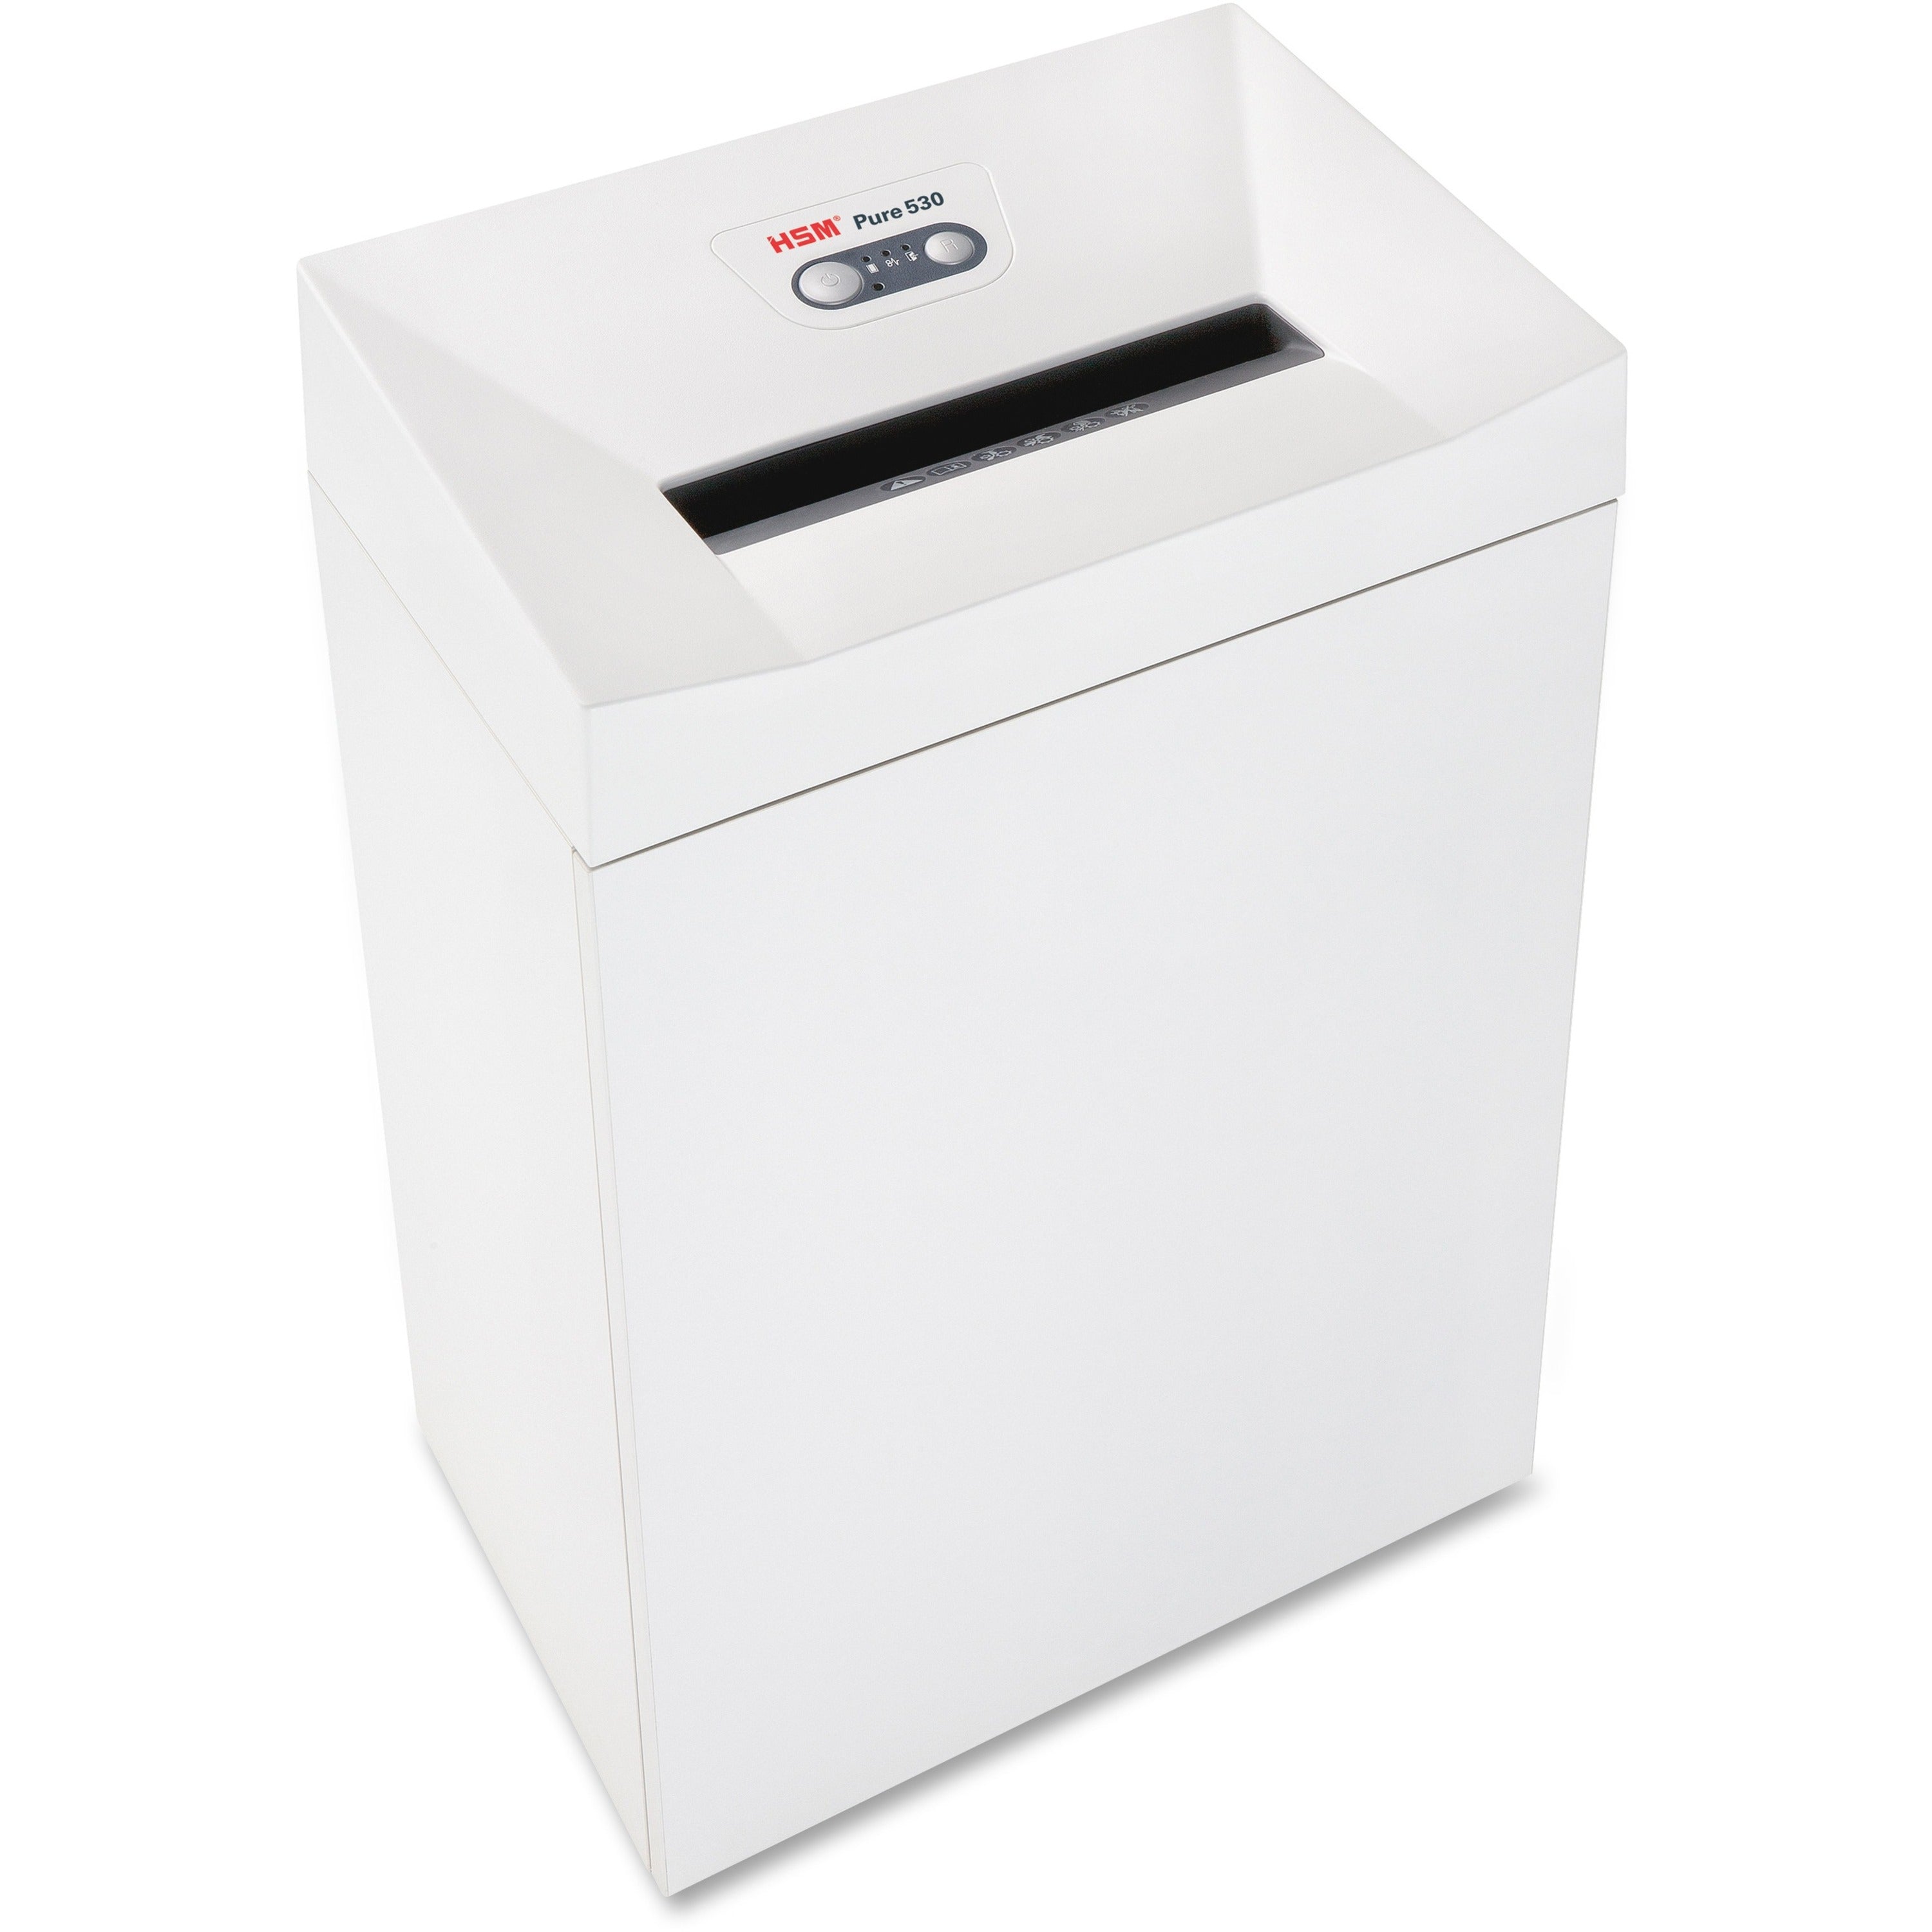 hsm-pure-530-3-16-x-1-1-8-continuous-shredder-particle-cut-16-per-pass-for-shredding-staples-paper-paper-clip-credit-card-cd-dvd-0188-x-1125-shred-size-p-4-o-3-t-4-e-3-f-1-1181-throat-2110-gal-wastebin-capacity-white_hsm2353113 - 1